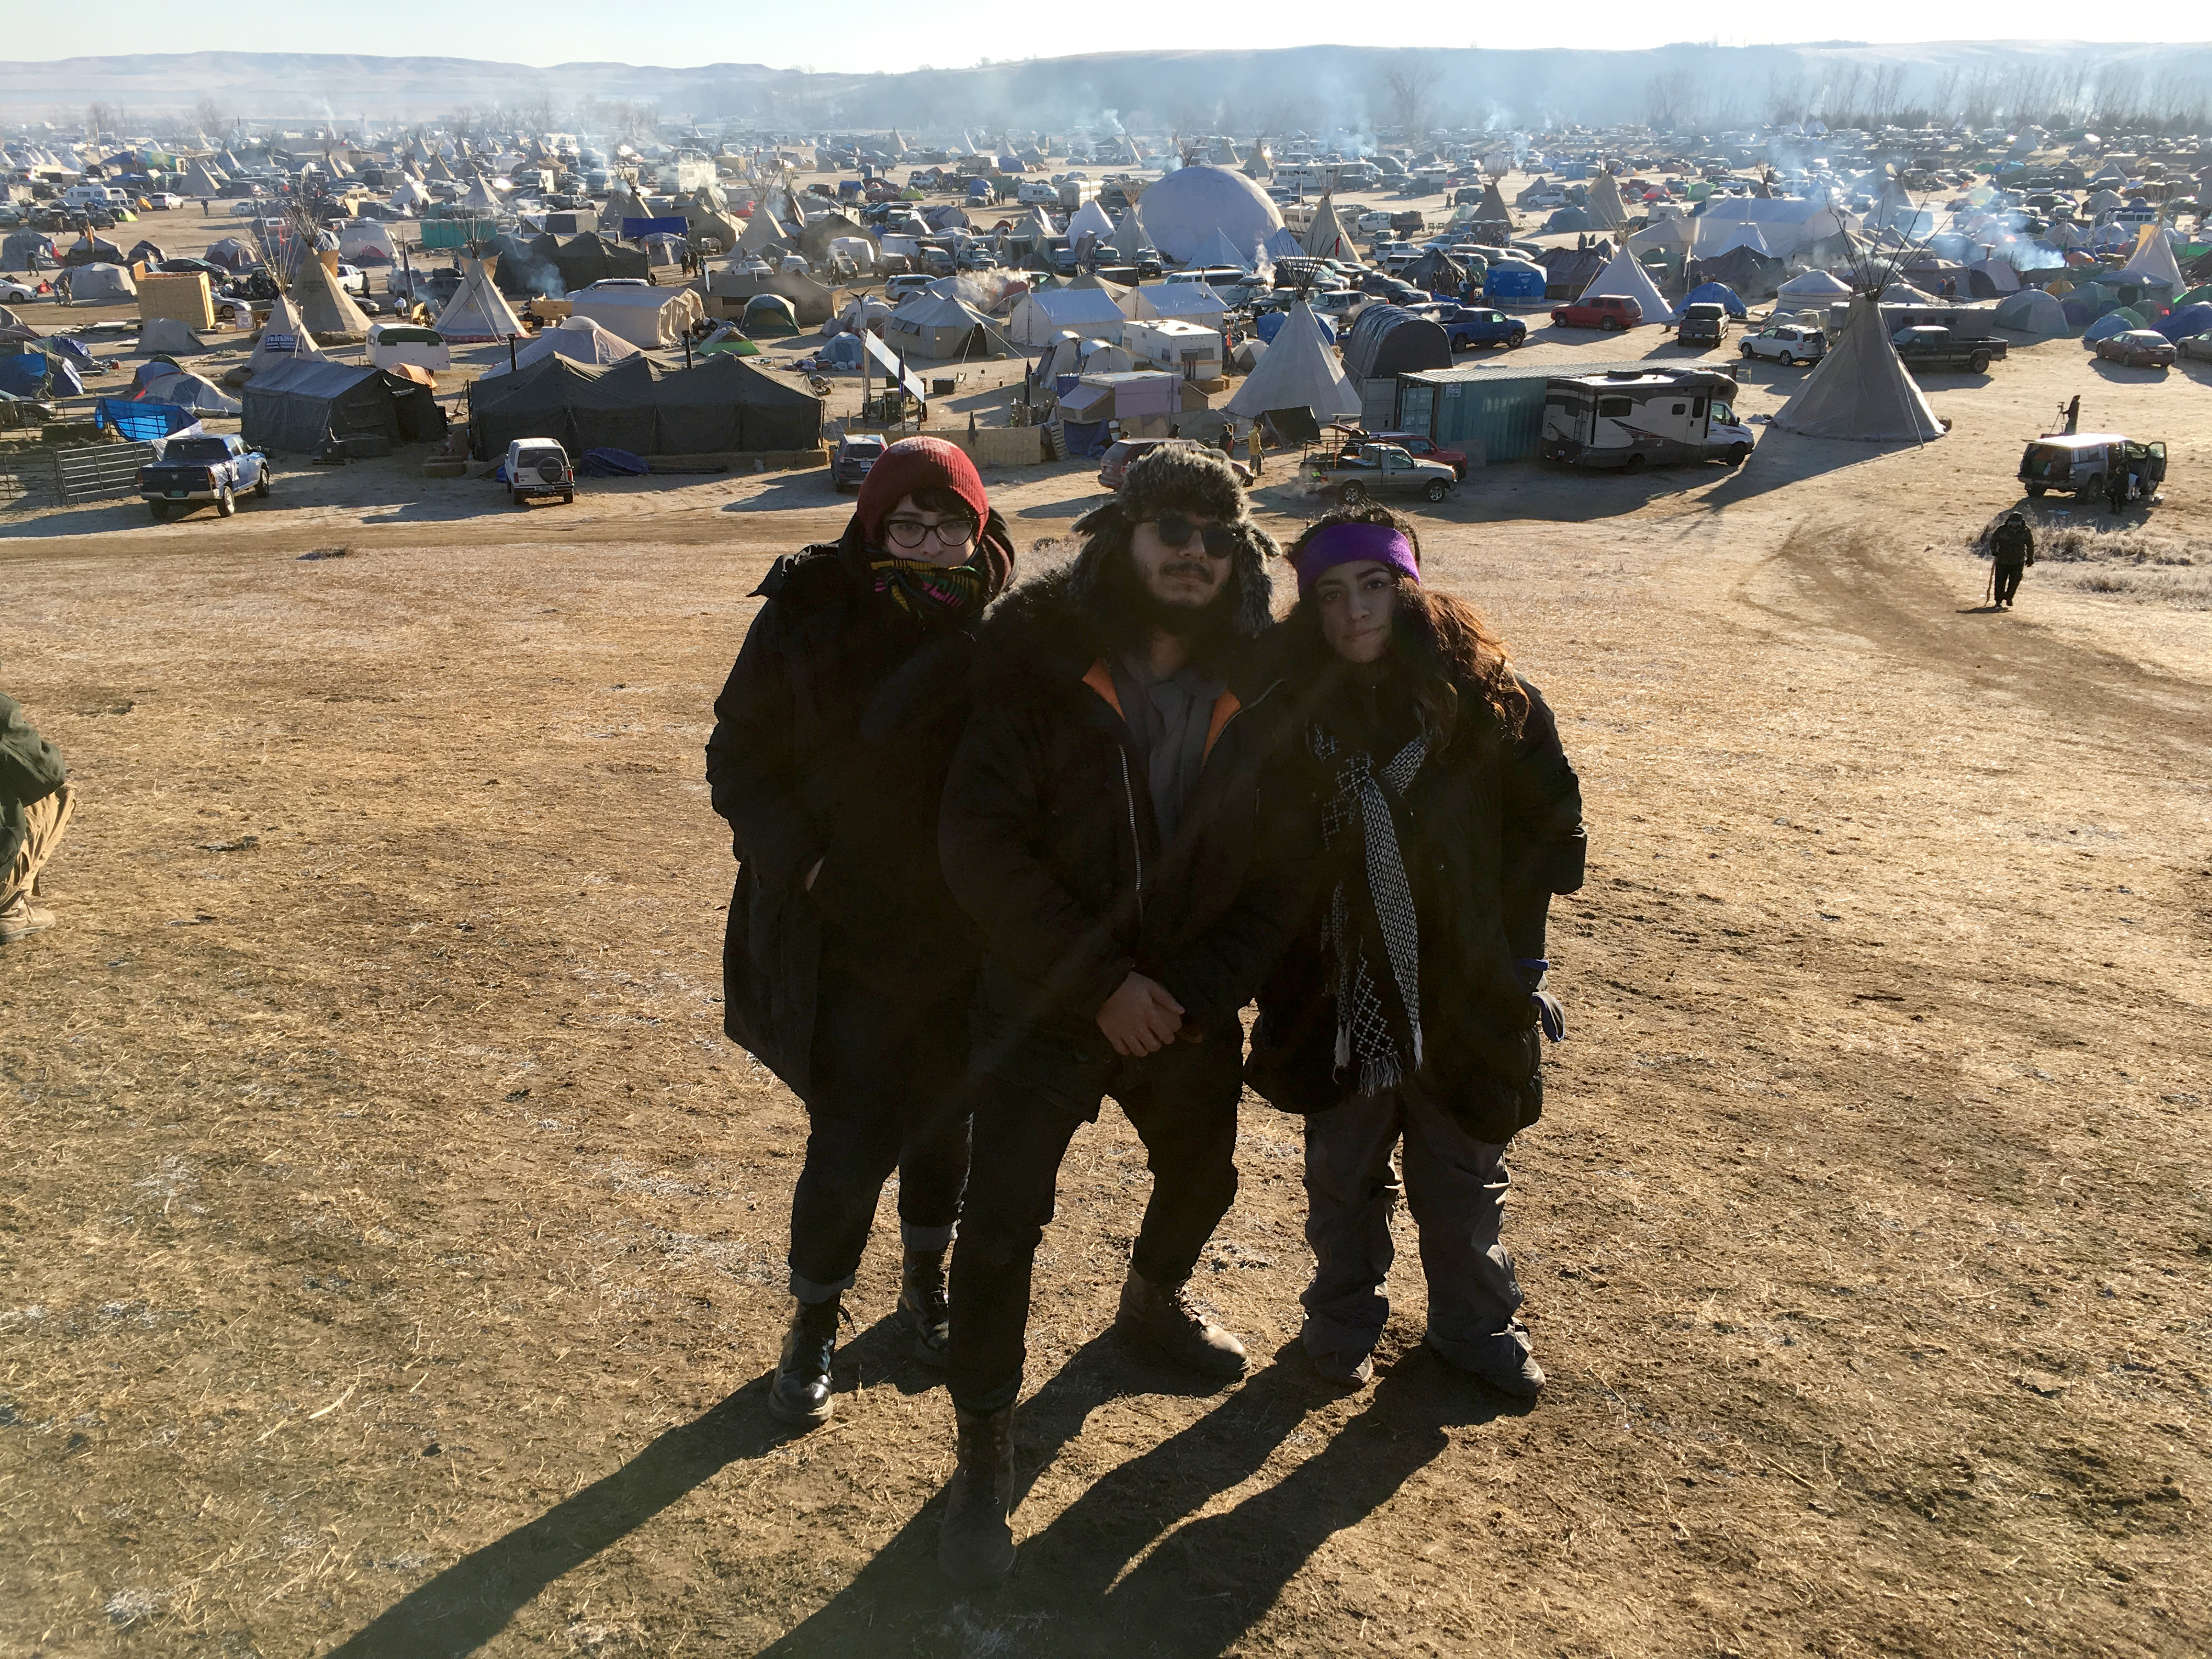 Me, Jose Alejandro Rodriguez, and Natalie Escobedo standing on top of Media Hill with view of Oceti Sakowin in the background, Photo credit: Juan Carlos Martinez